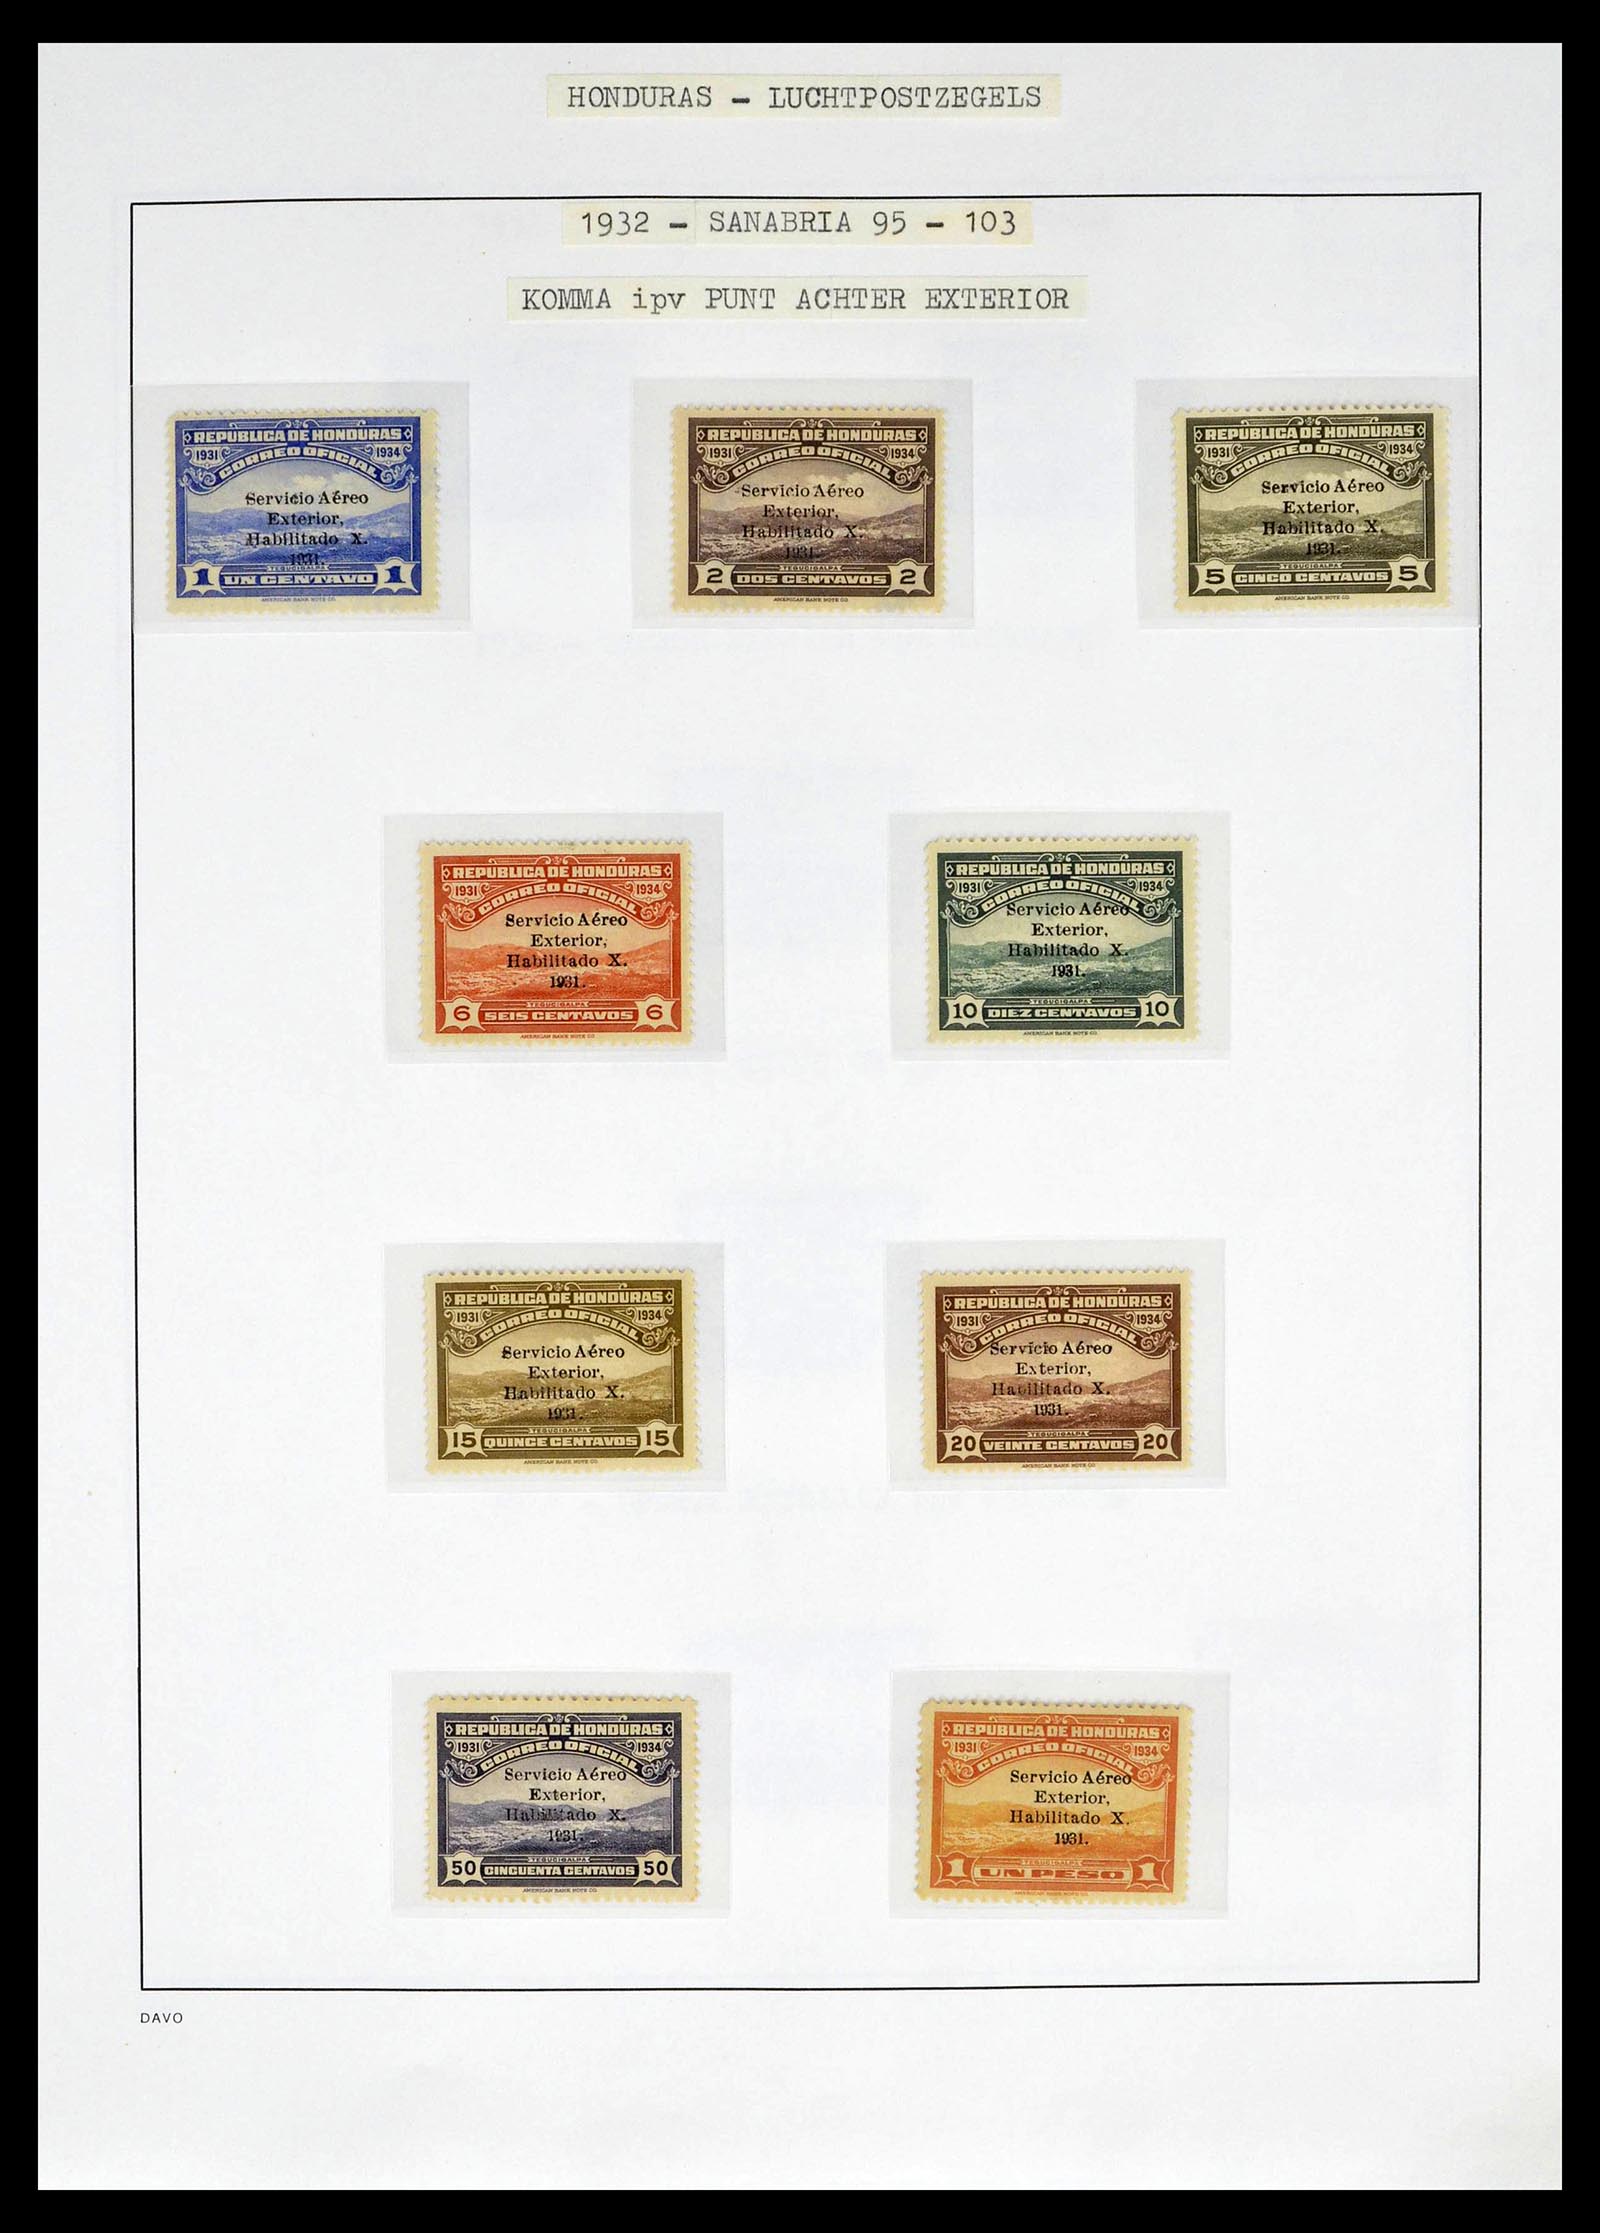 39410 0036 - Stamp collection 39410 Honduras topcollection airmail 1925-1984.